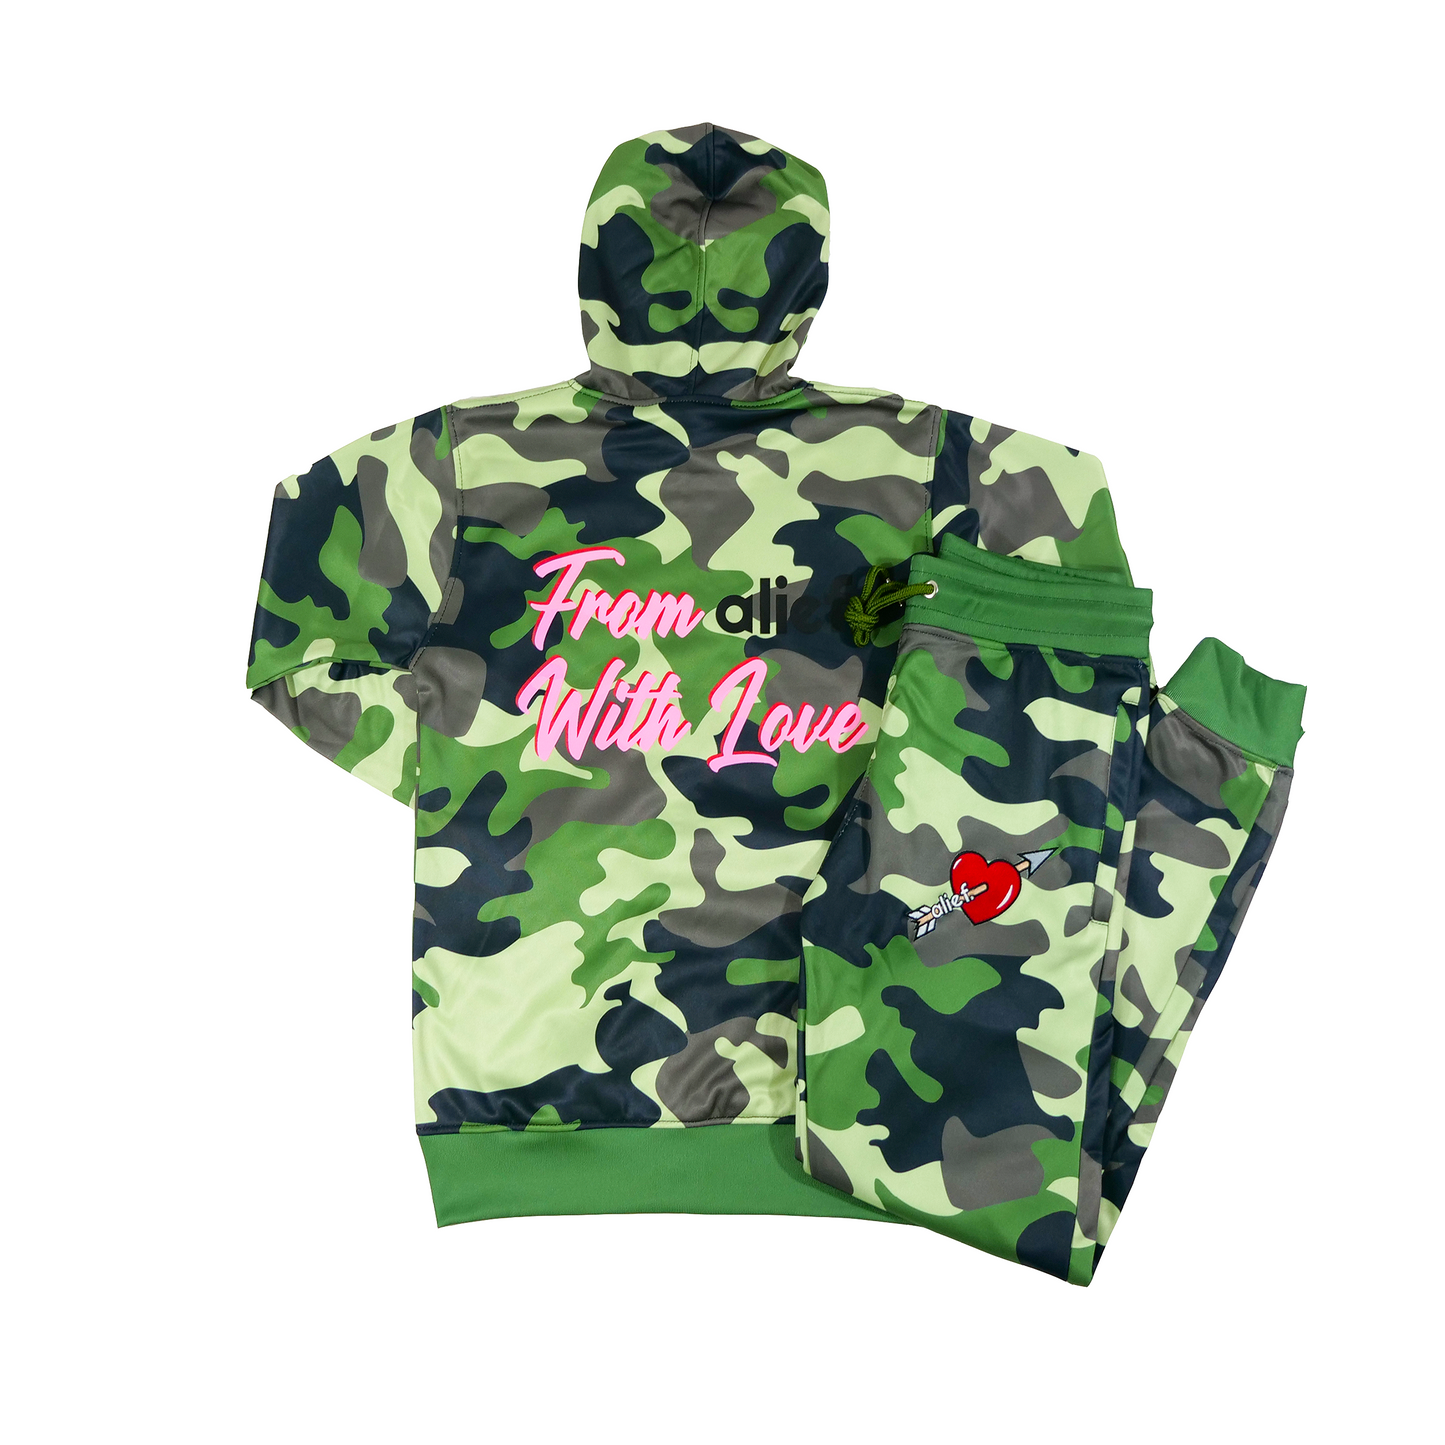 From Alief With Love Jumpsuit - Green Camo